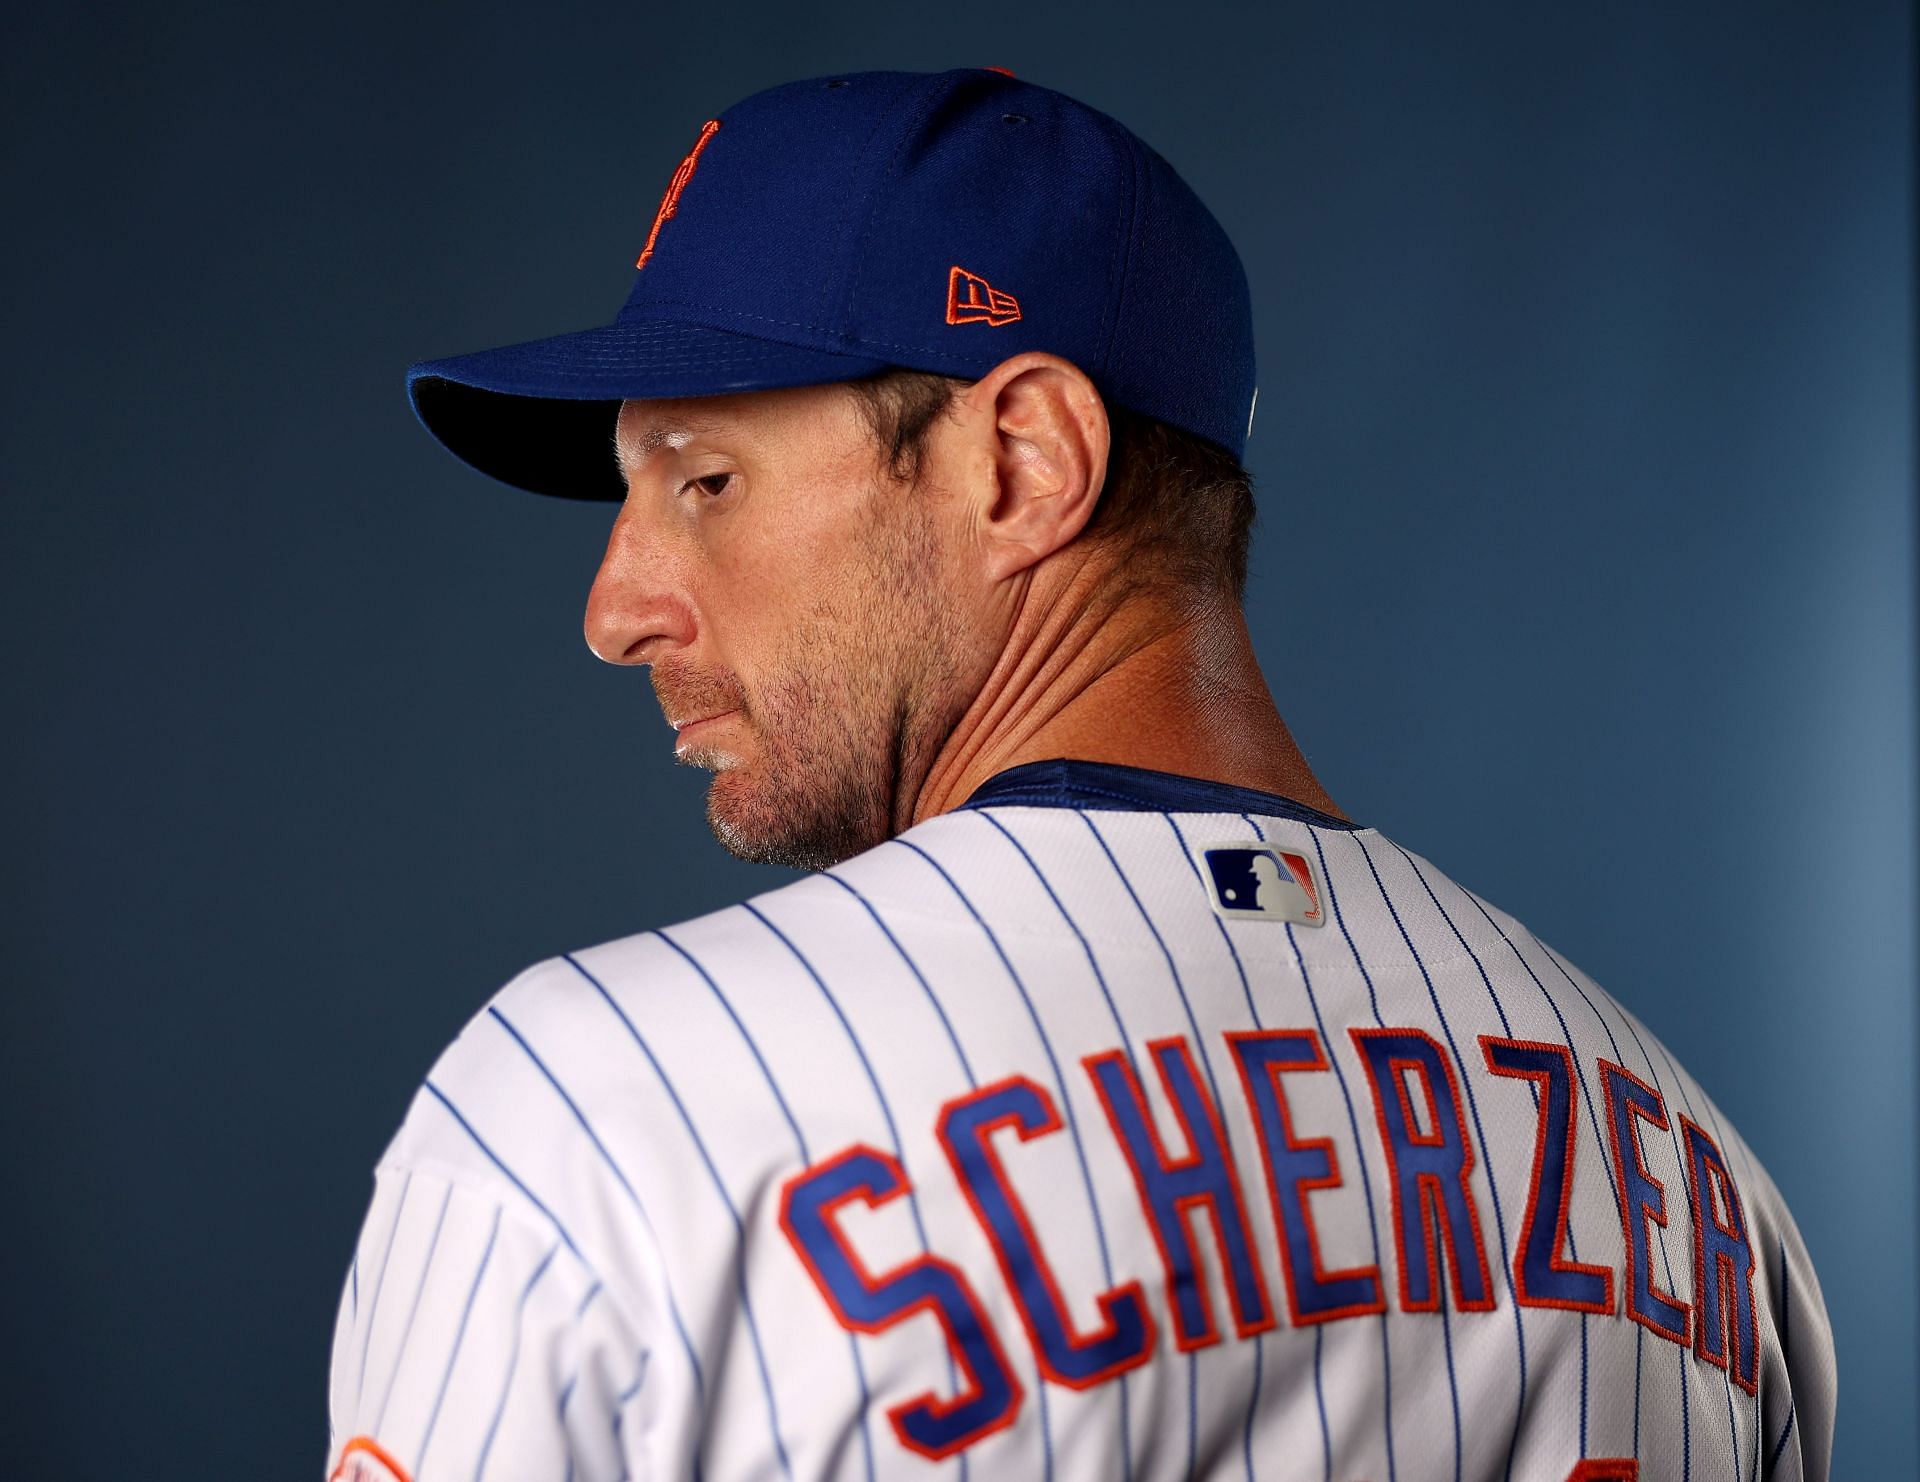 Max Scherzer #21 of the New York Mets poses for a portrait